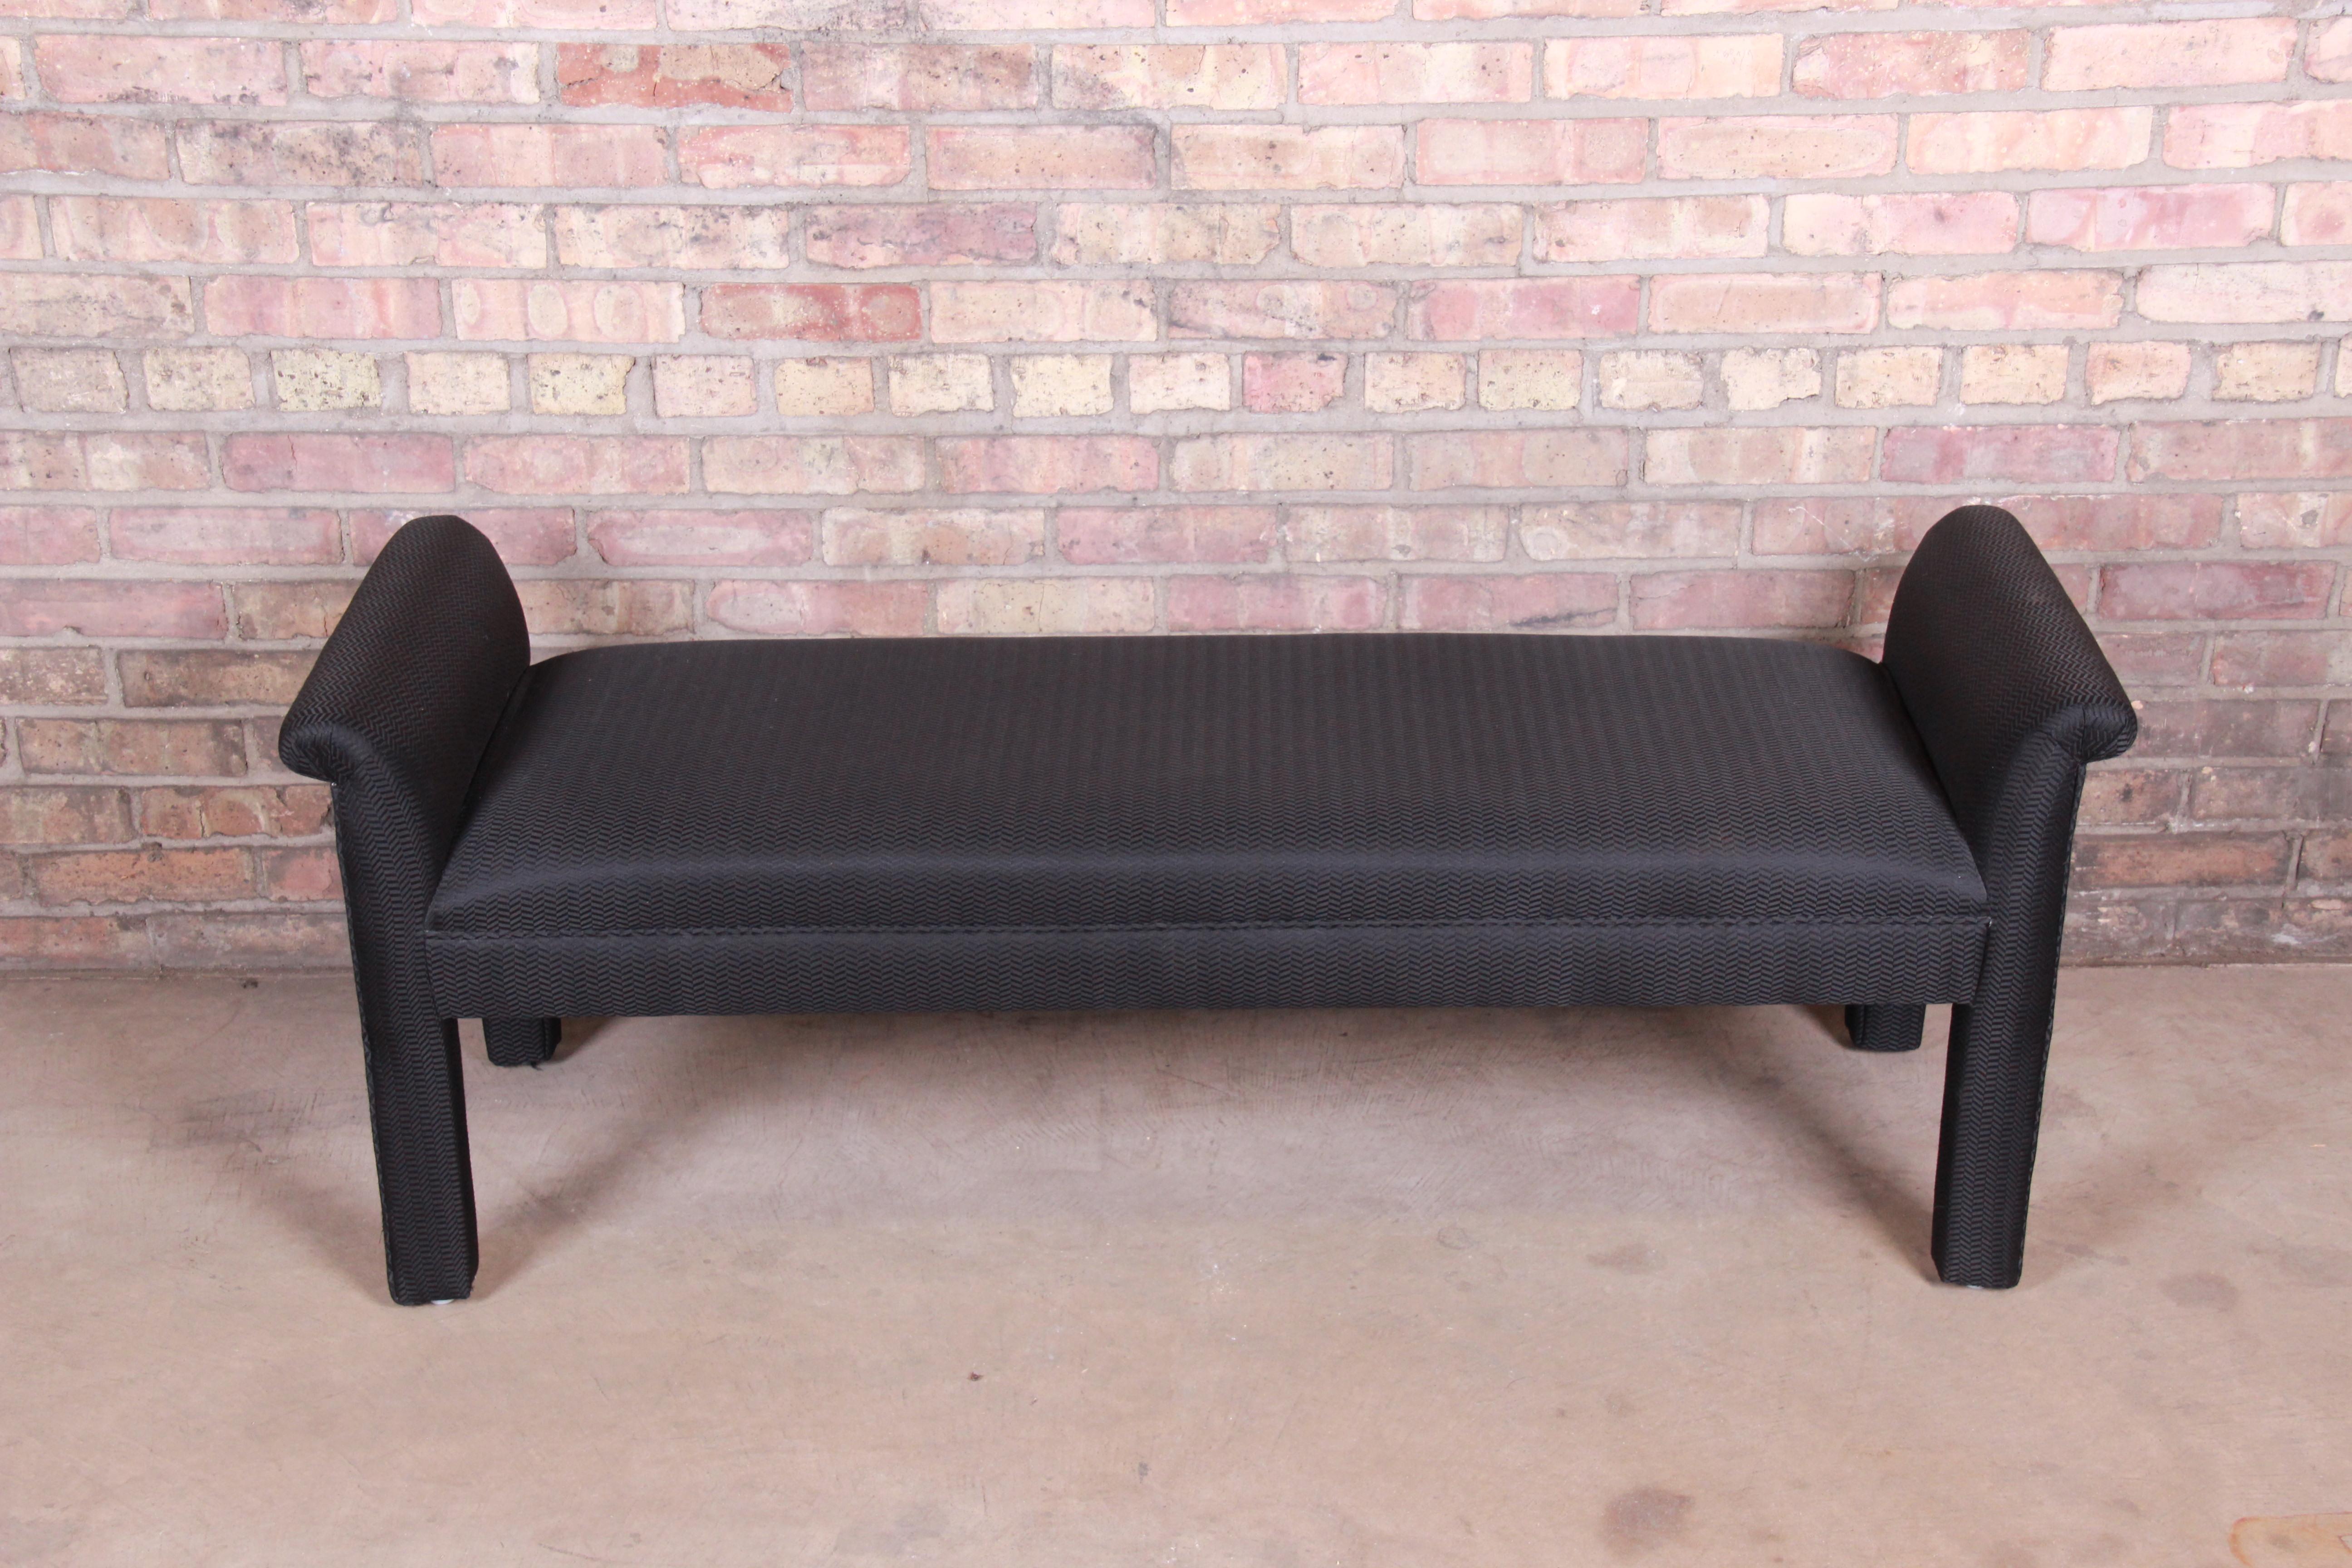 A gorgeous mid-century modern Parsons style upholstered window bench

USA, Circa 1970s

Measures: 55.5